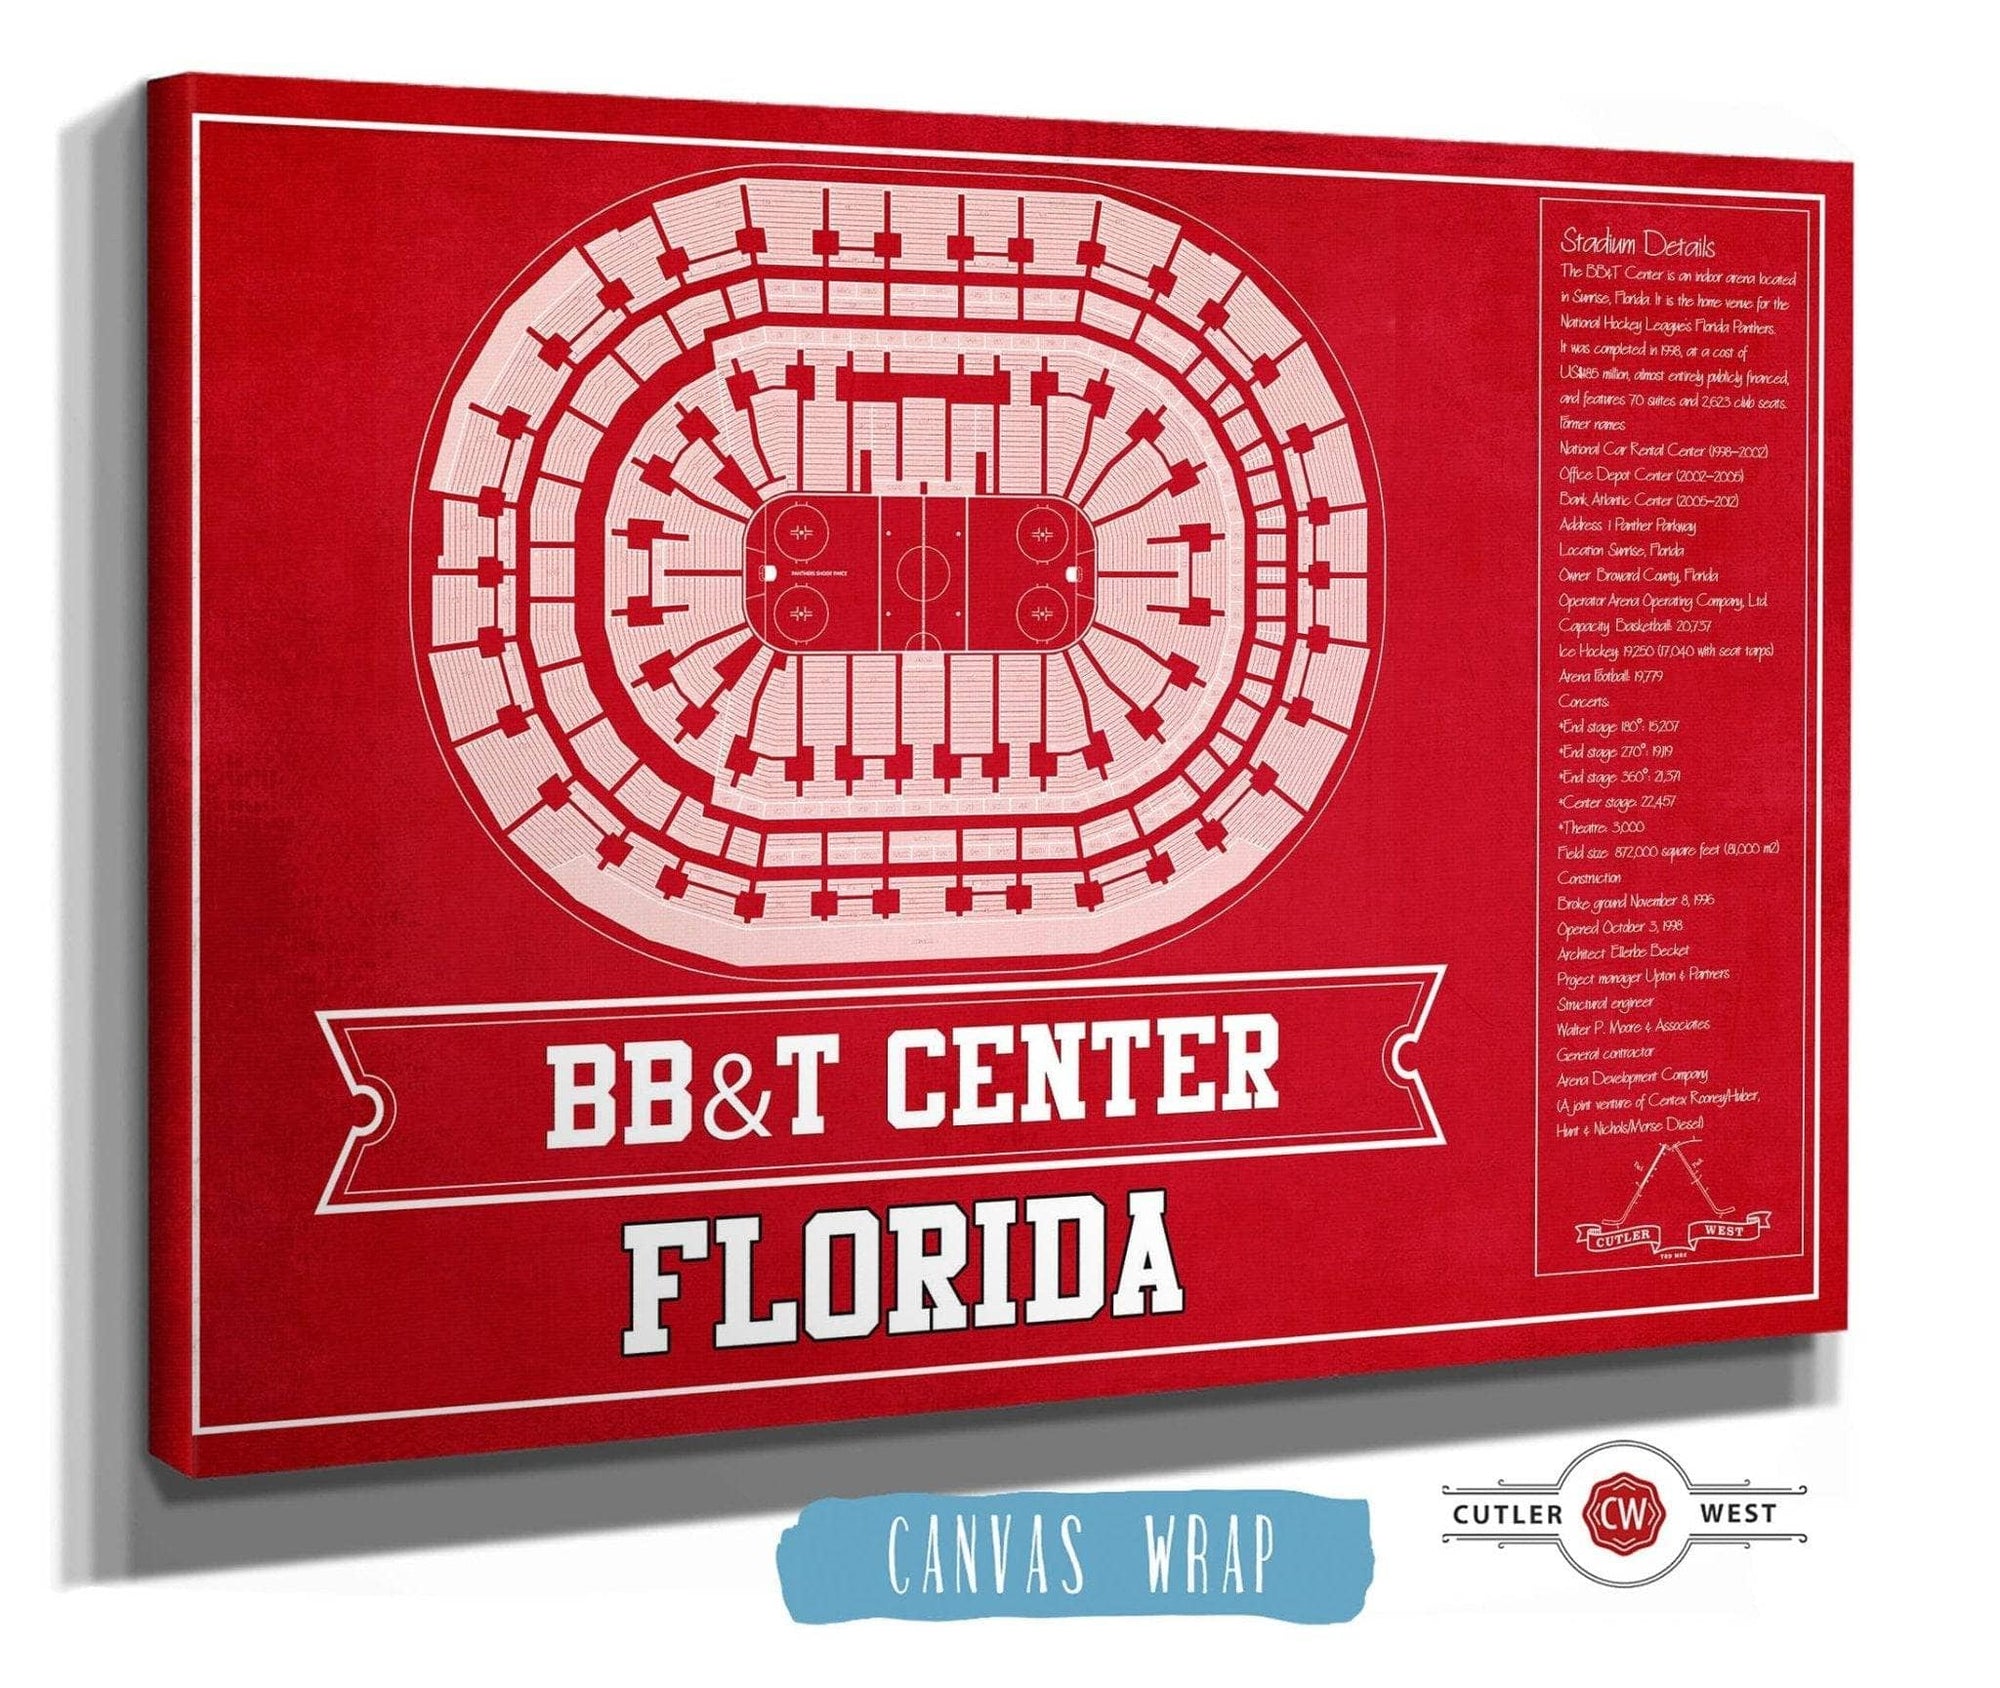 Cutler West 14" x 11" / Stretched Canvas Wrap Florida Panthers BB&T Center Seating Chart - Vintage Hockey Team Color Print 659981334-TEAM